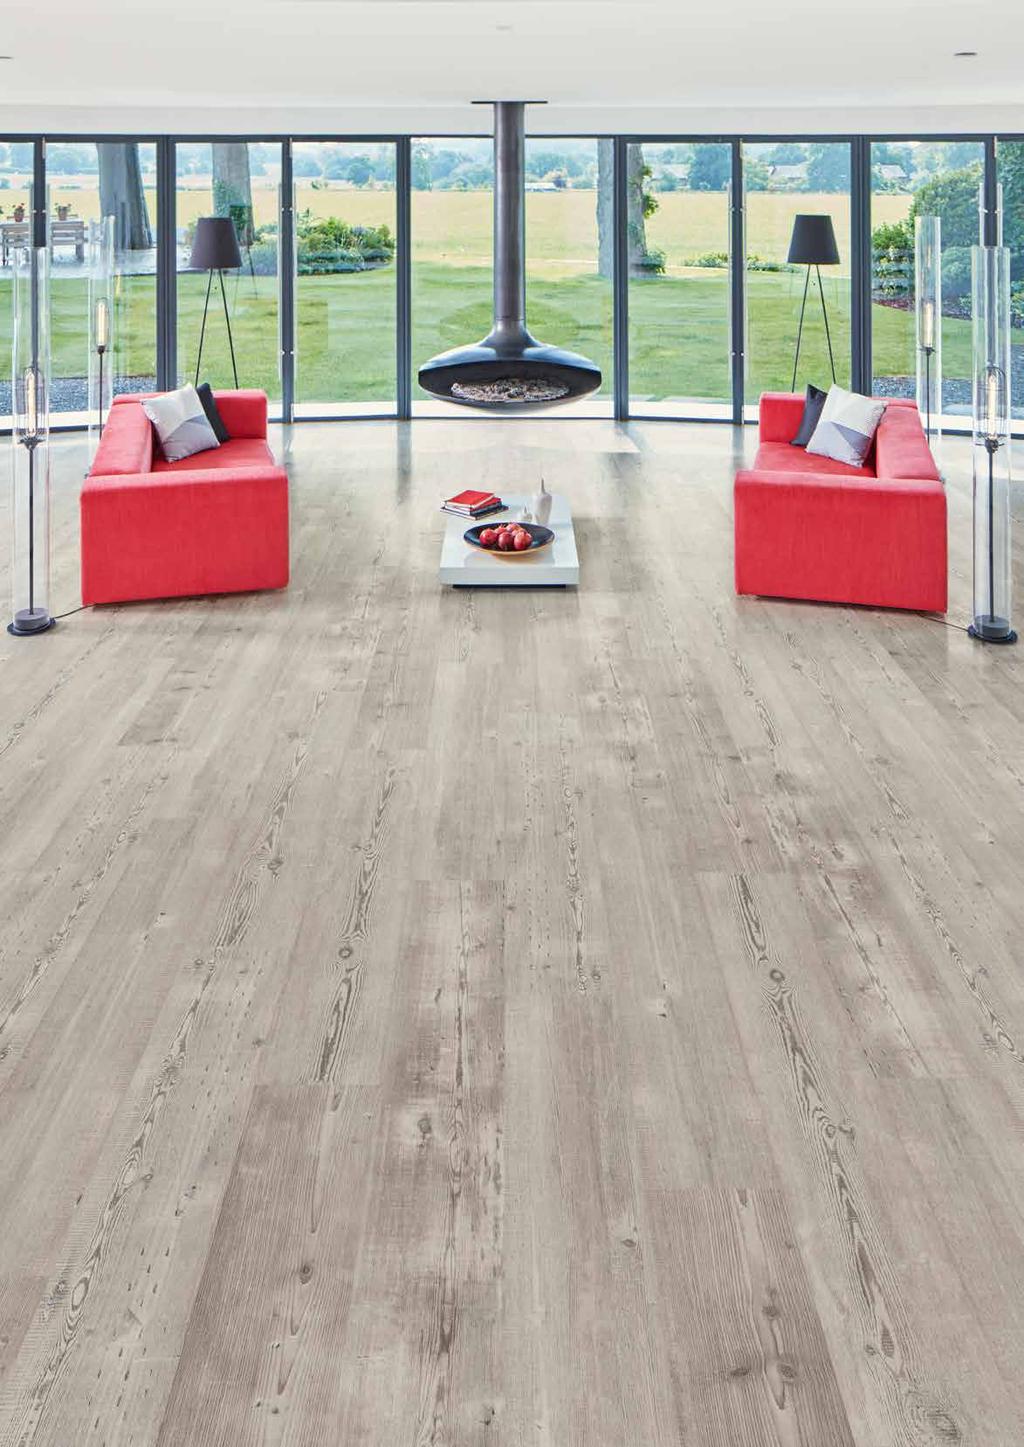 The light hues of Weathered Heart Pine fit perfectly with current design trends, where